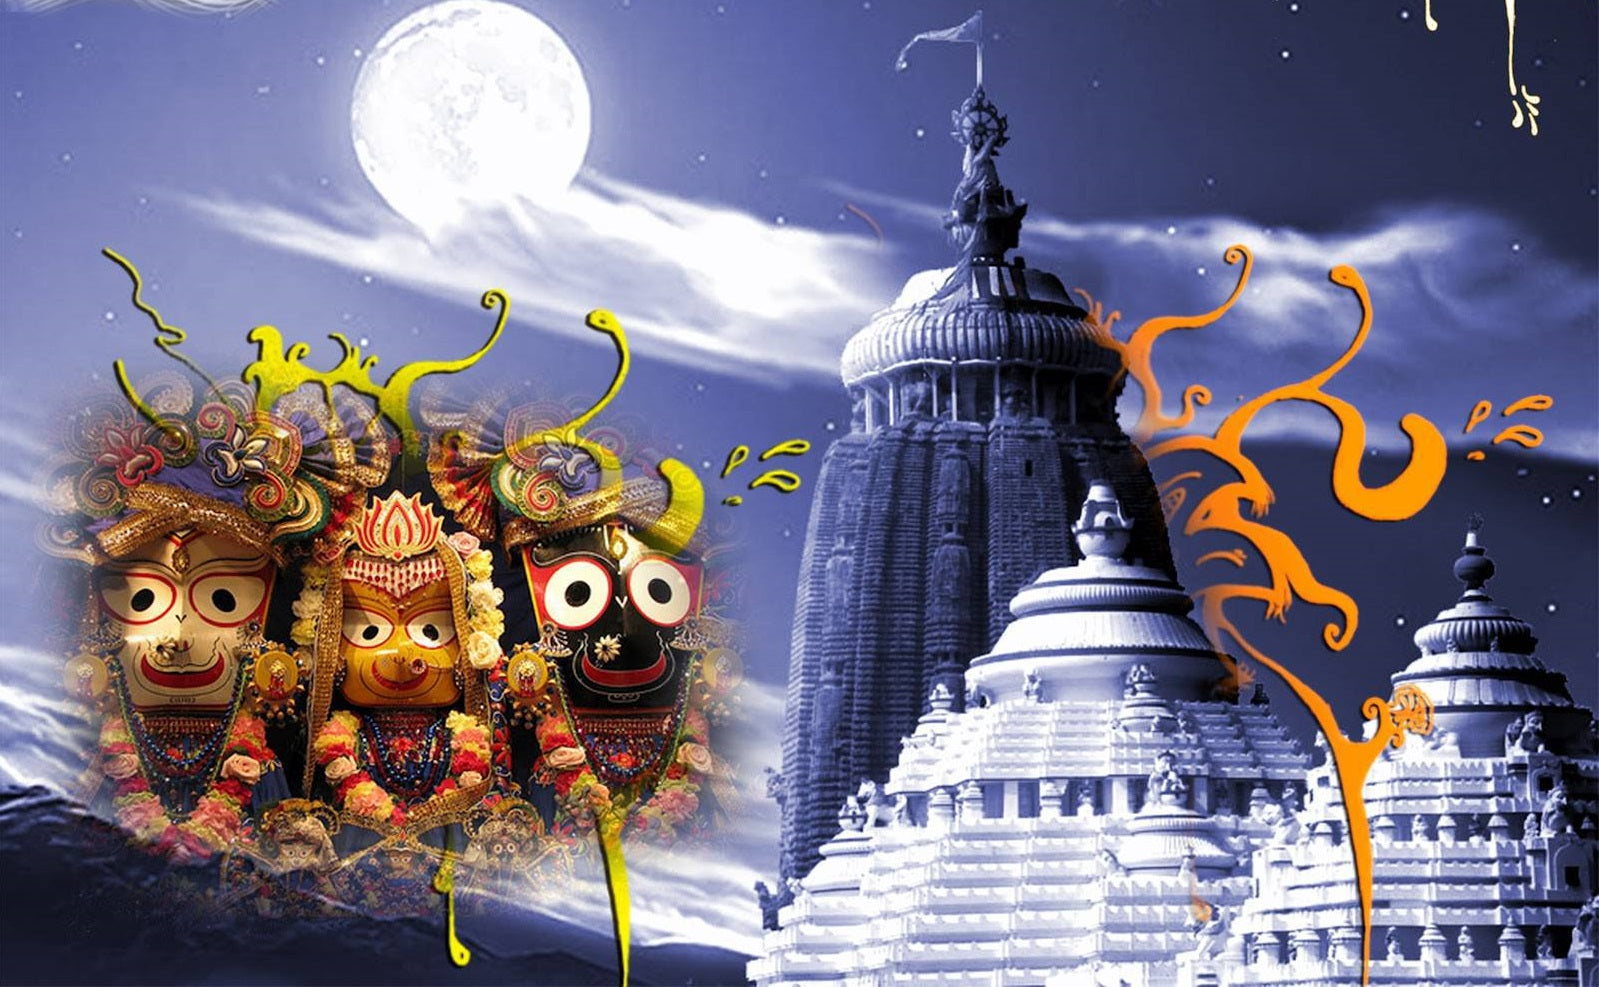 12 Miraculous & Amazing facts about the Lord Jagannatha temple in Puri